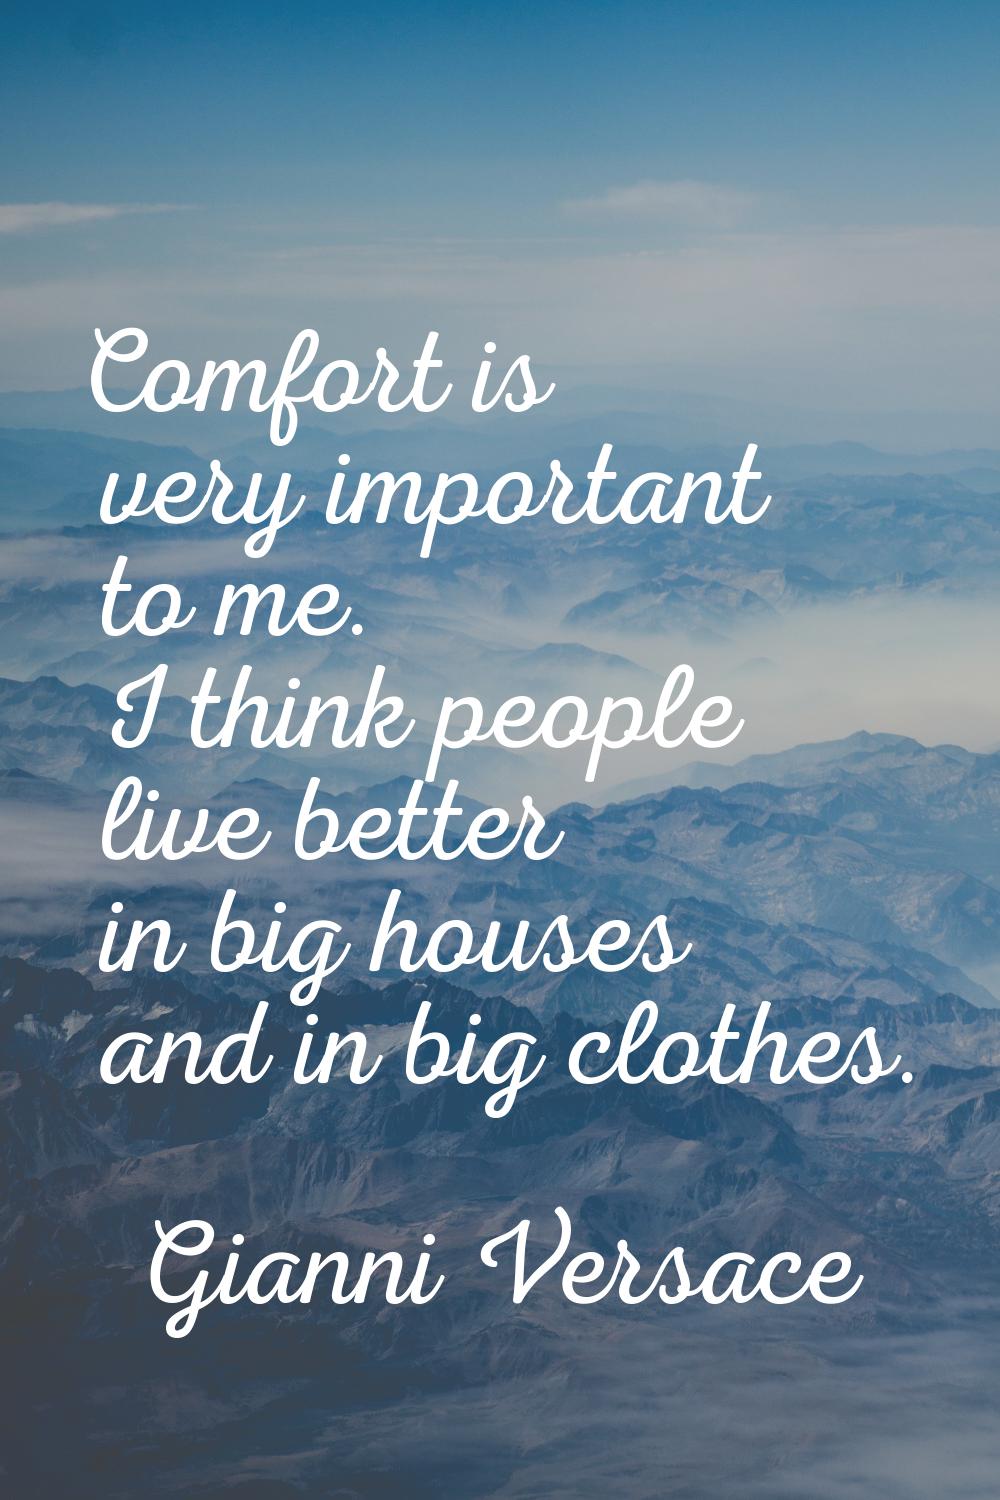 Comfort is very important to me. I think people live better in big houses and in big clothes.